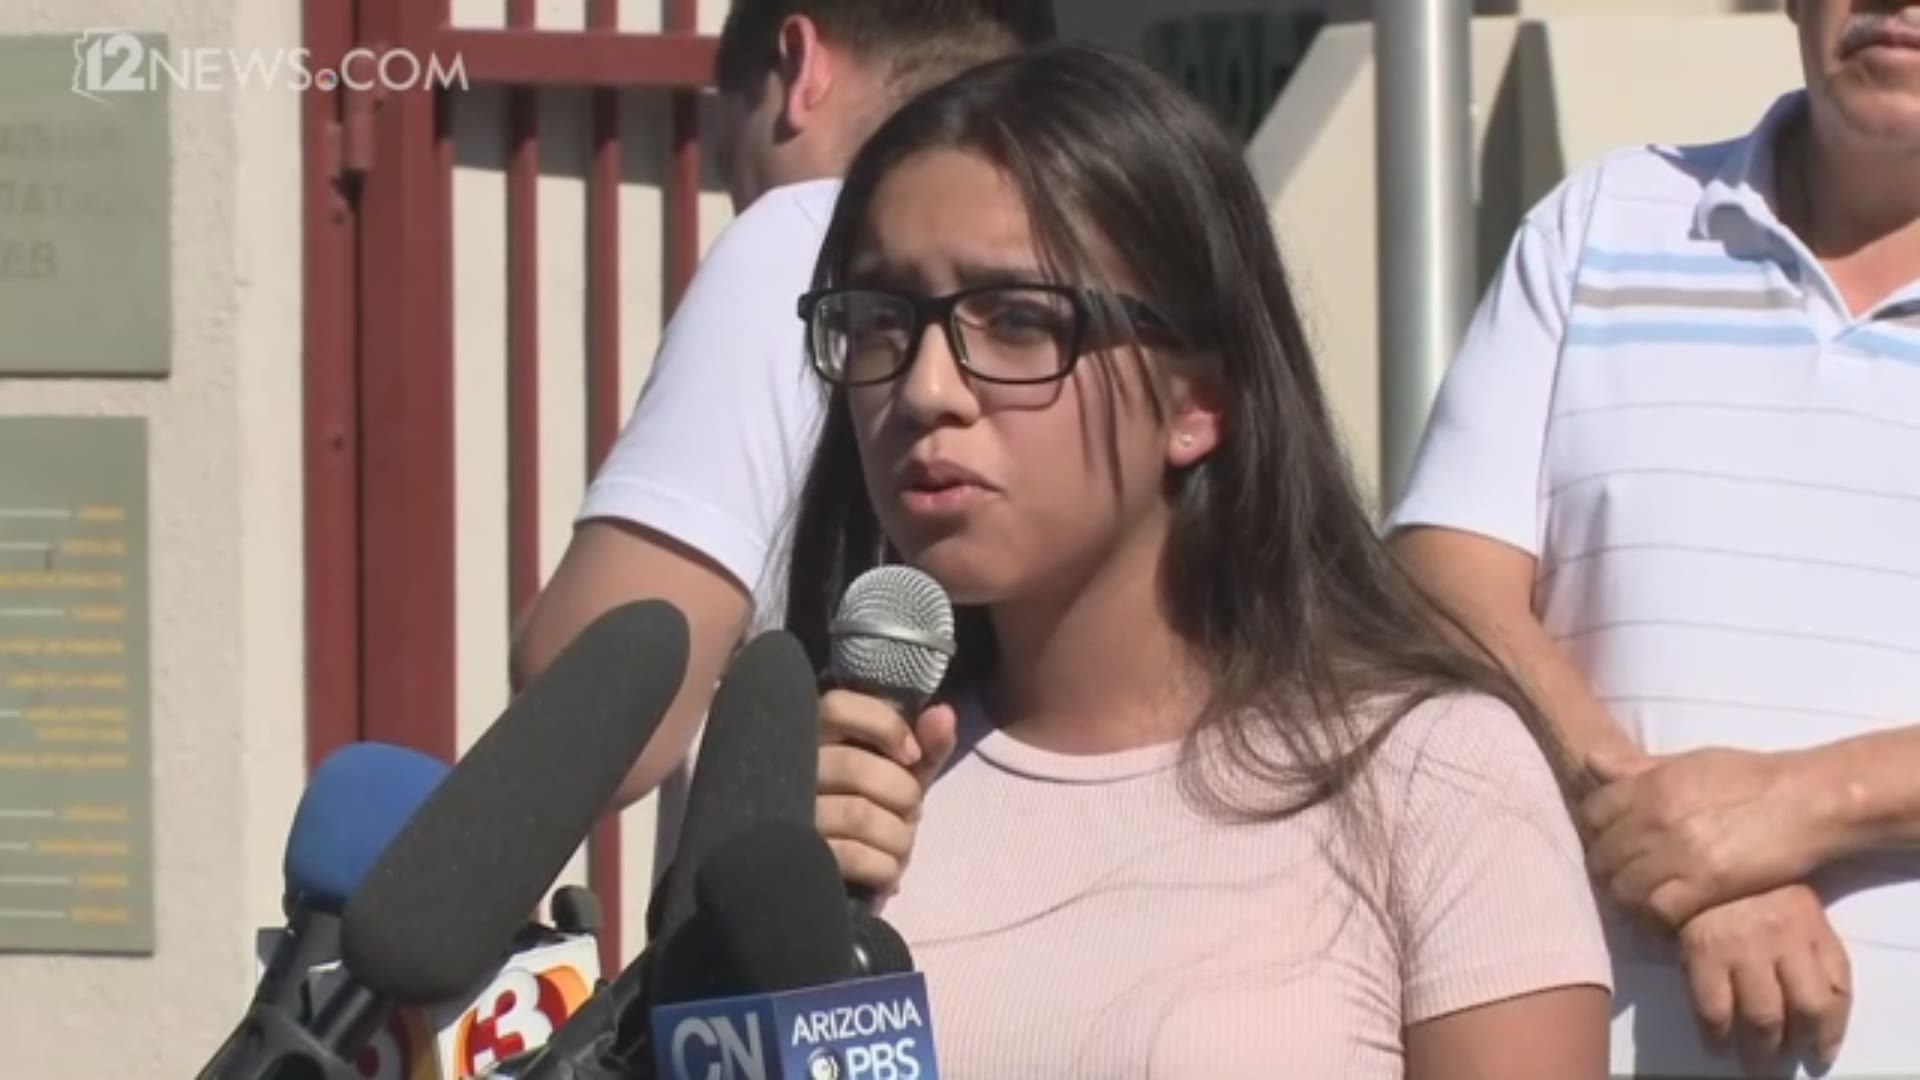 A family spoke out after their Mesa mother was deported from Arizona to Mexico.